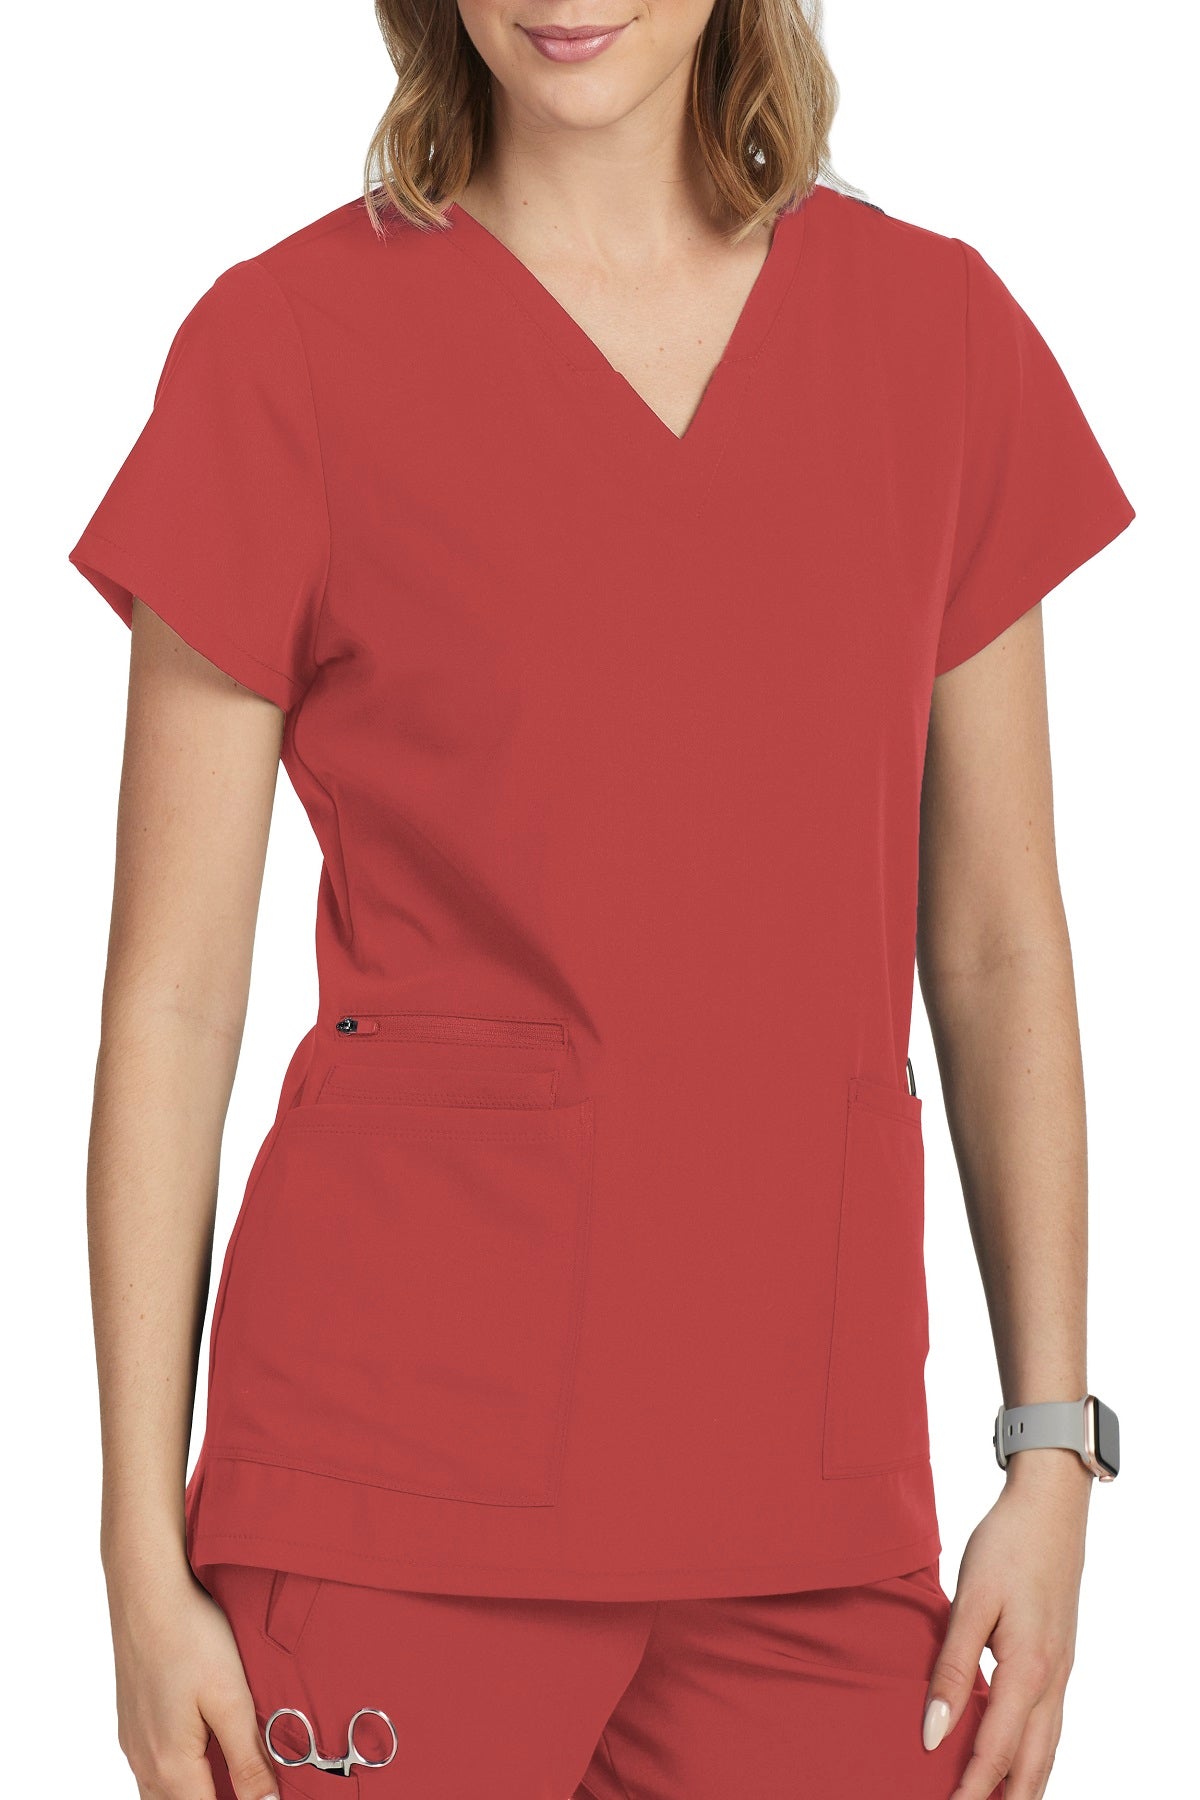 Barco Unify Scrub Top Purpose V-Neck in Dusty Red at Parker's Clothing and Shoes.